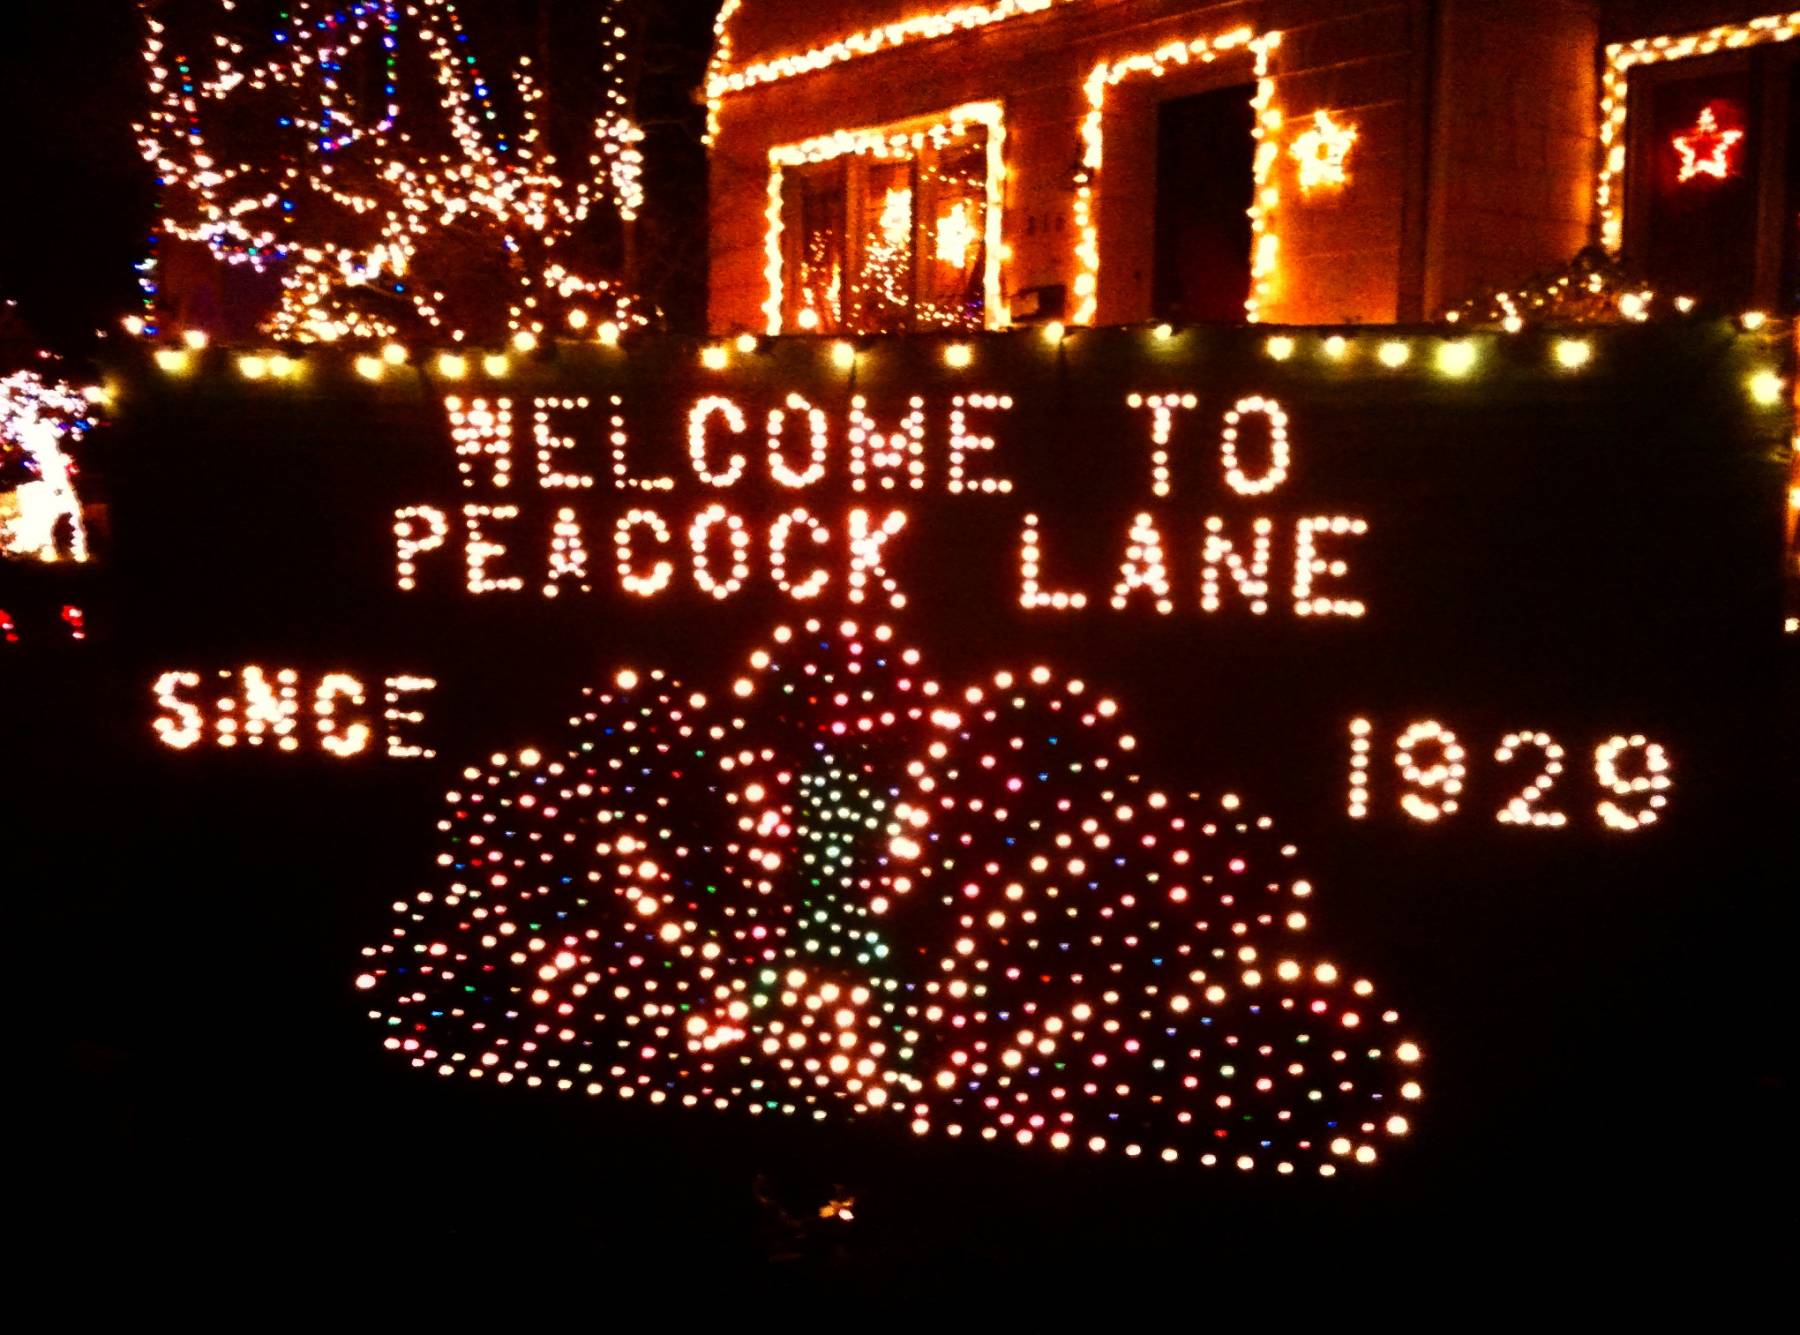 Holiday Eggnog Party for Six at Historic Peacock Lane, Portland